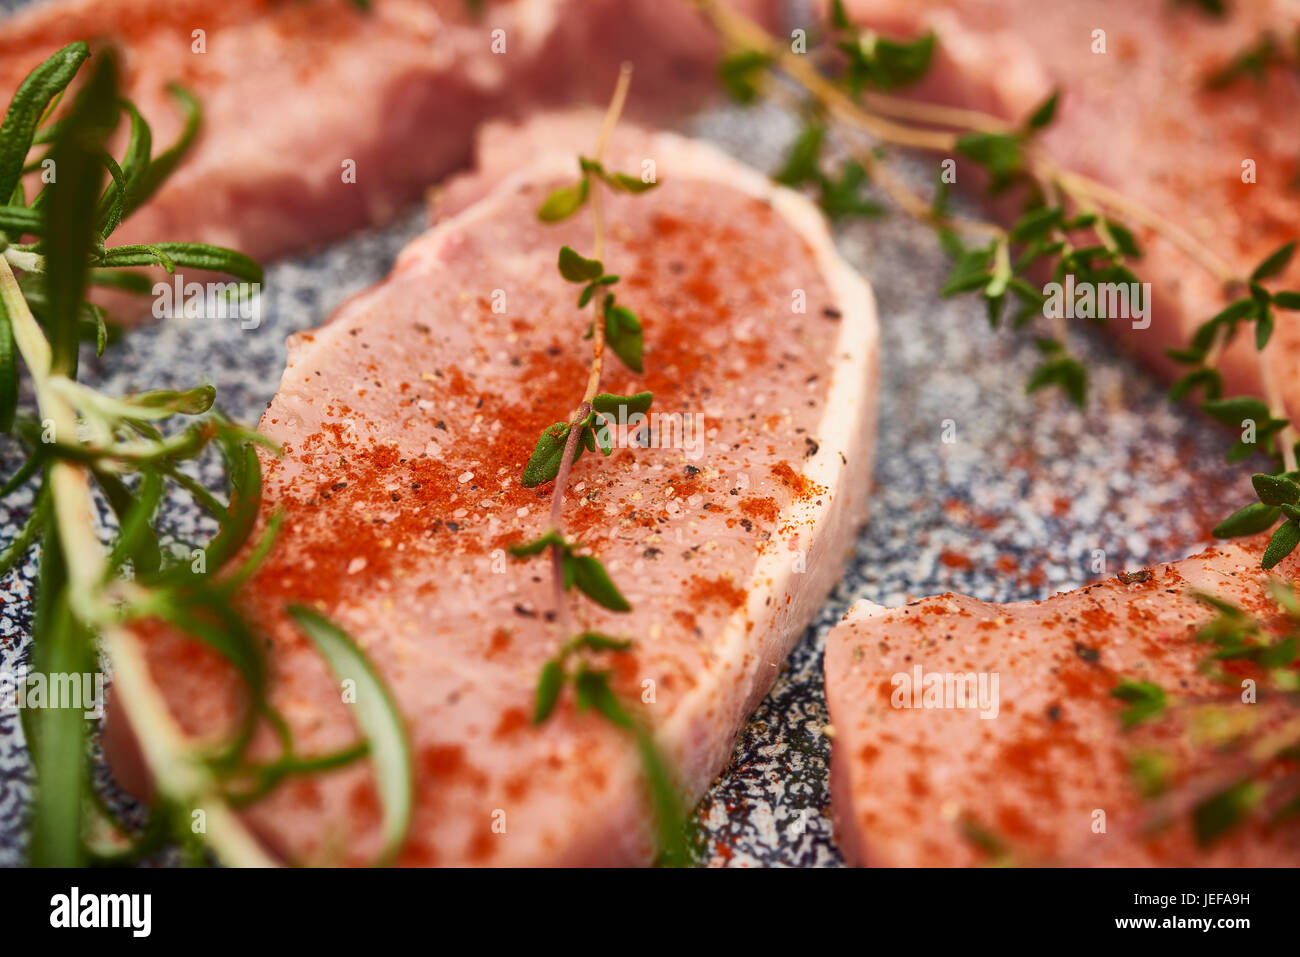 Raw pork chops in pan ready for cooking with cauliflower and potatoes Stock Photo